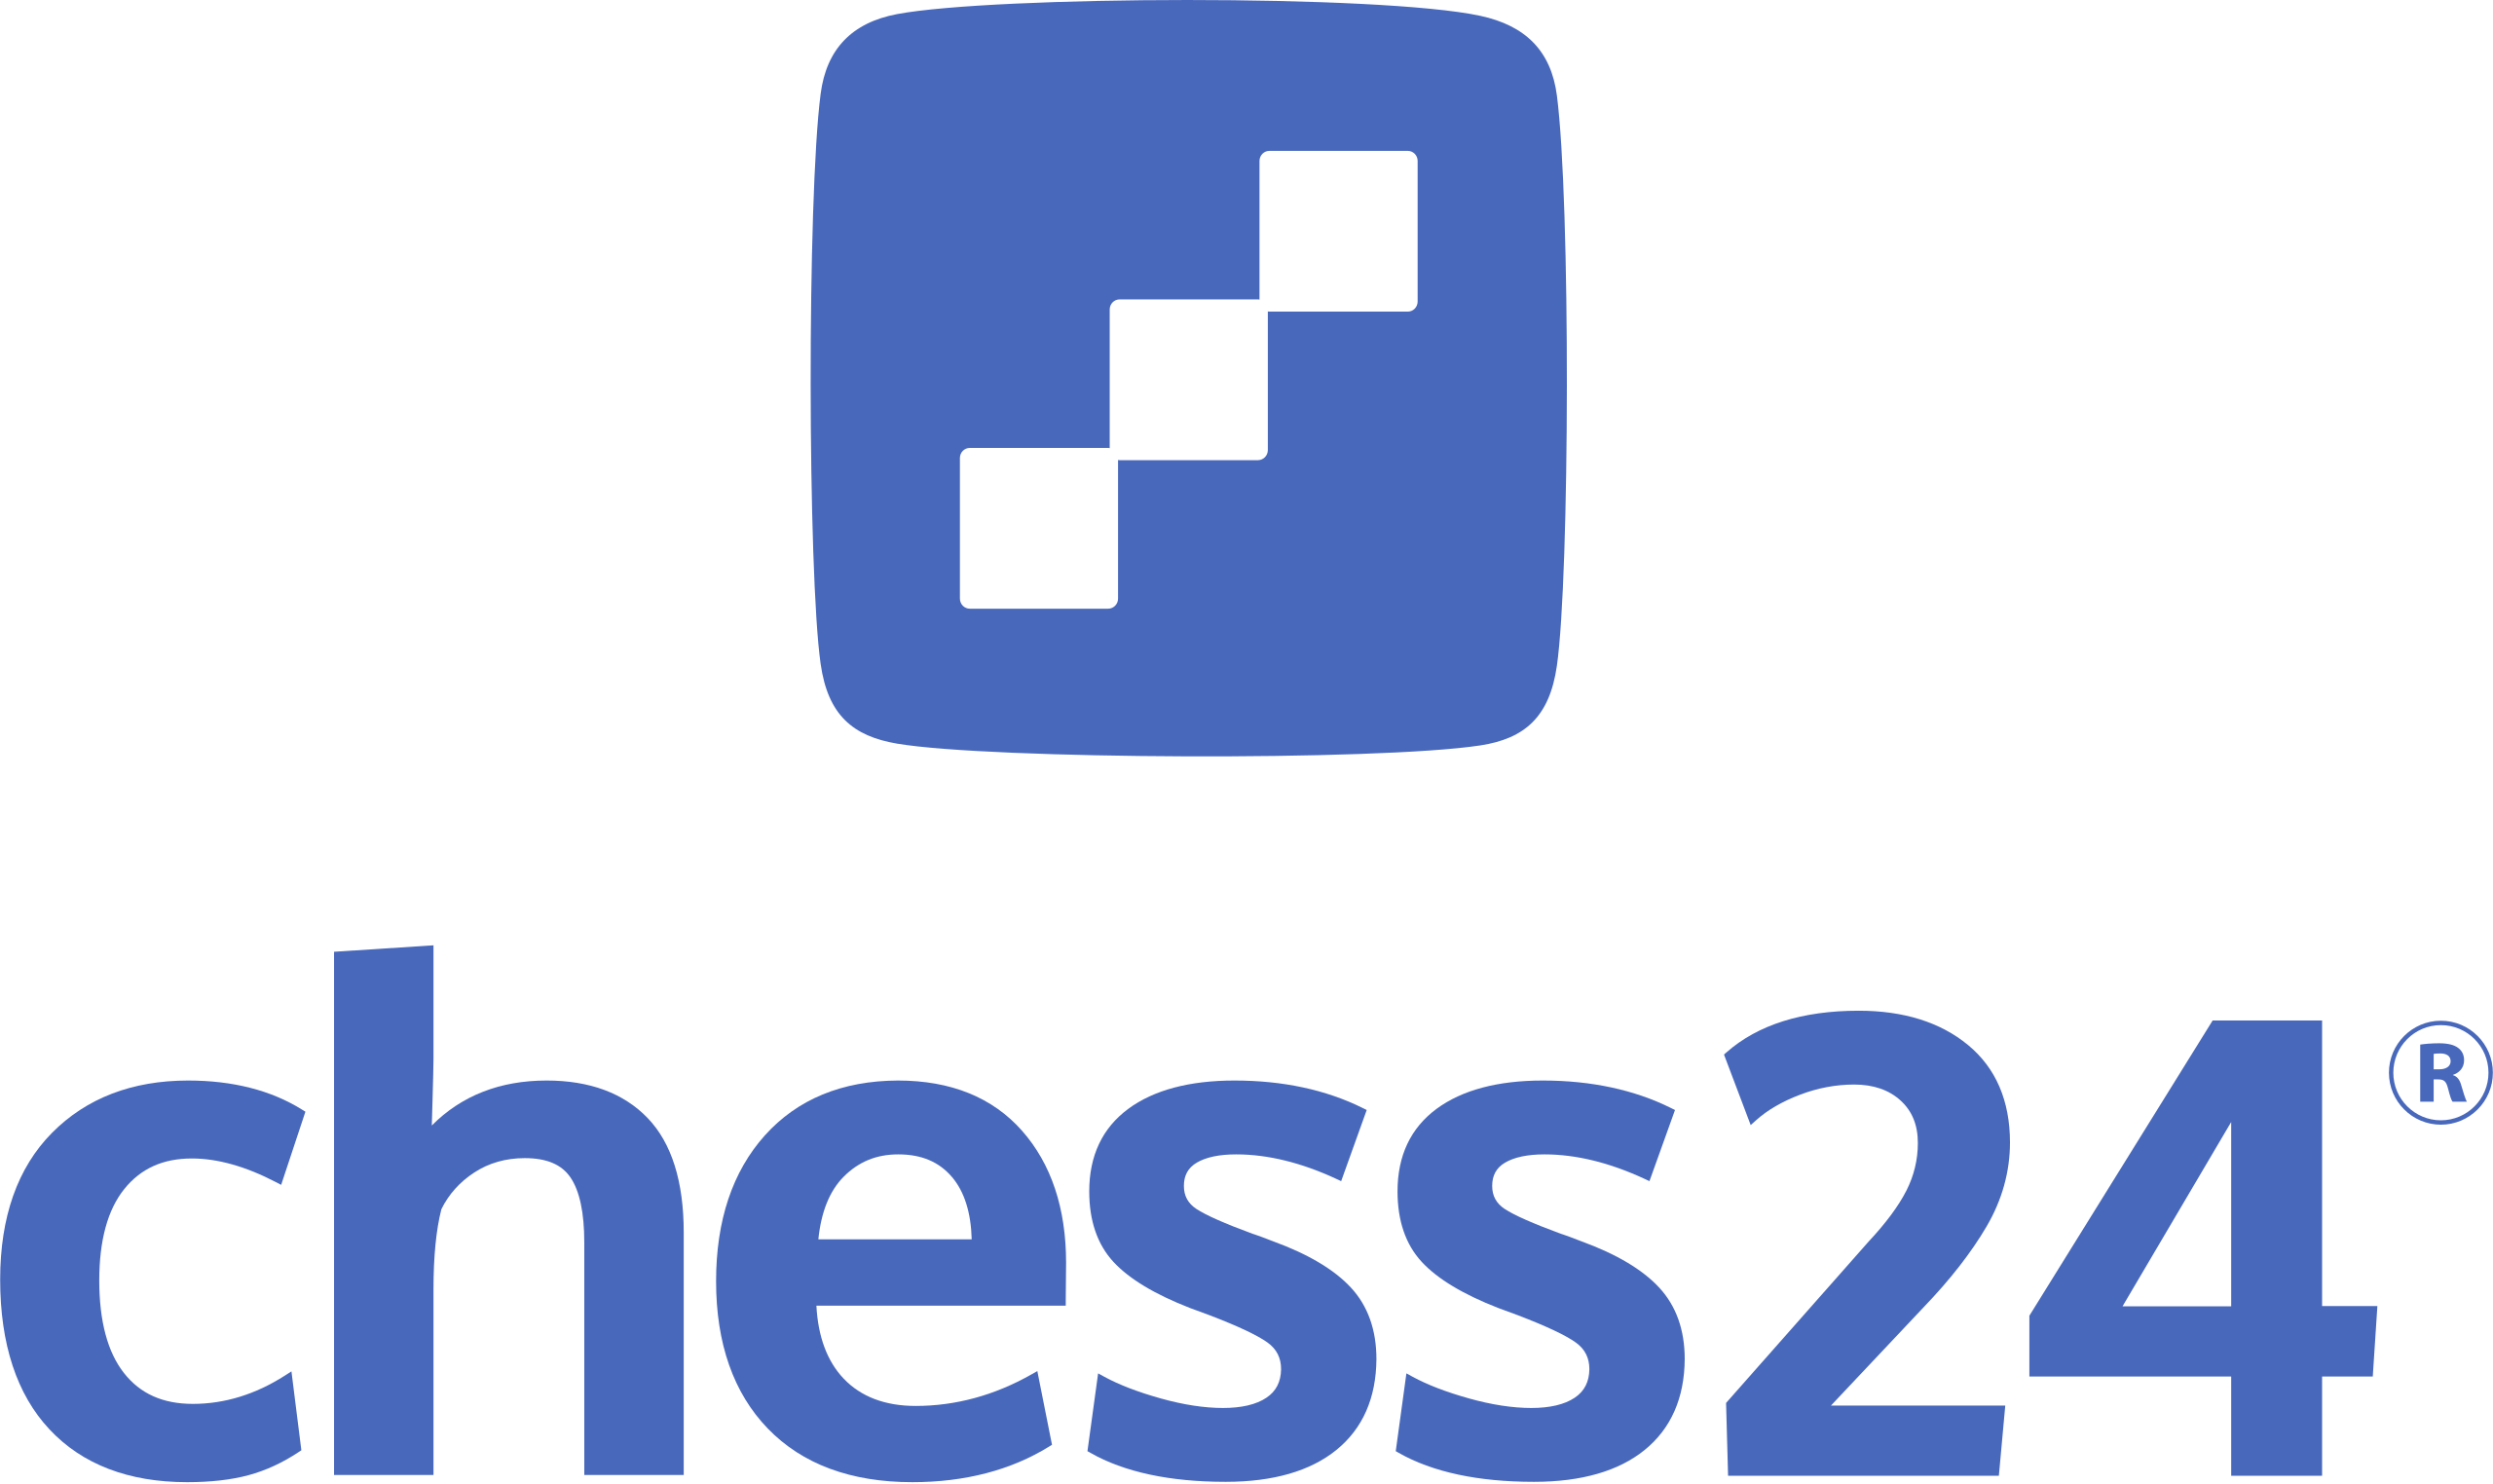 Chess24 Projects  Photos, videos, logos, illustrations and